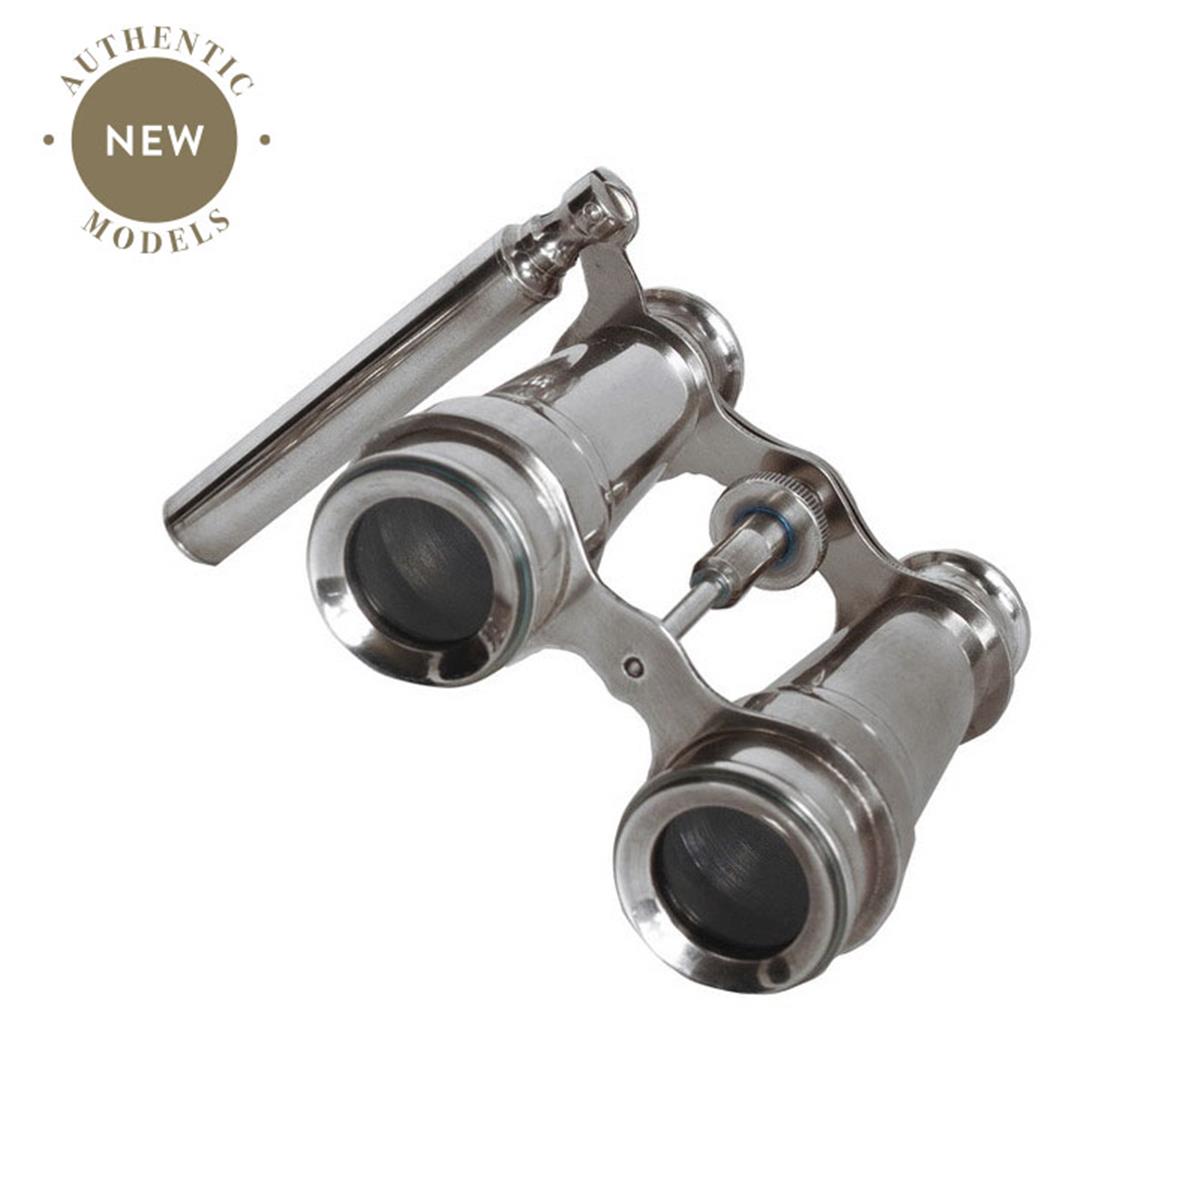 Picture of Authentic Models KA034 4 in. Opera Binocular, Polished Silver